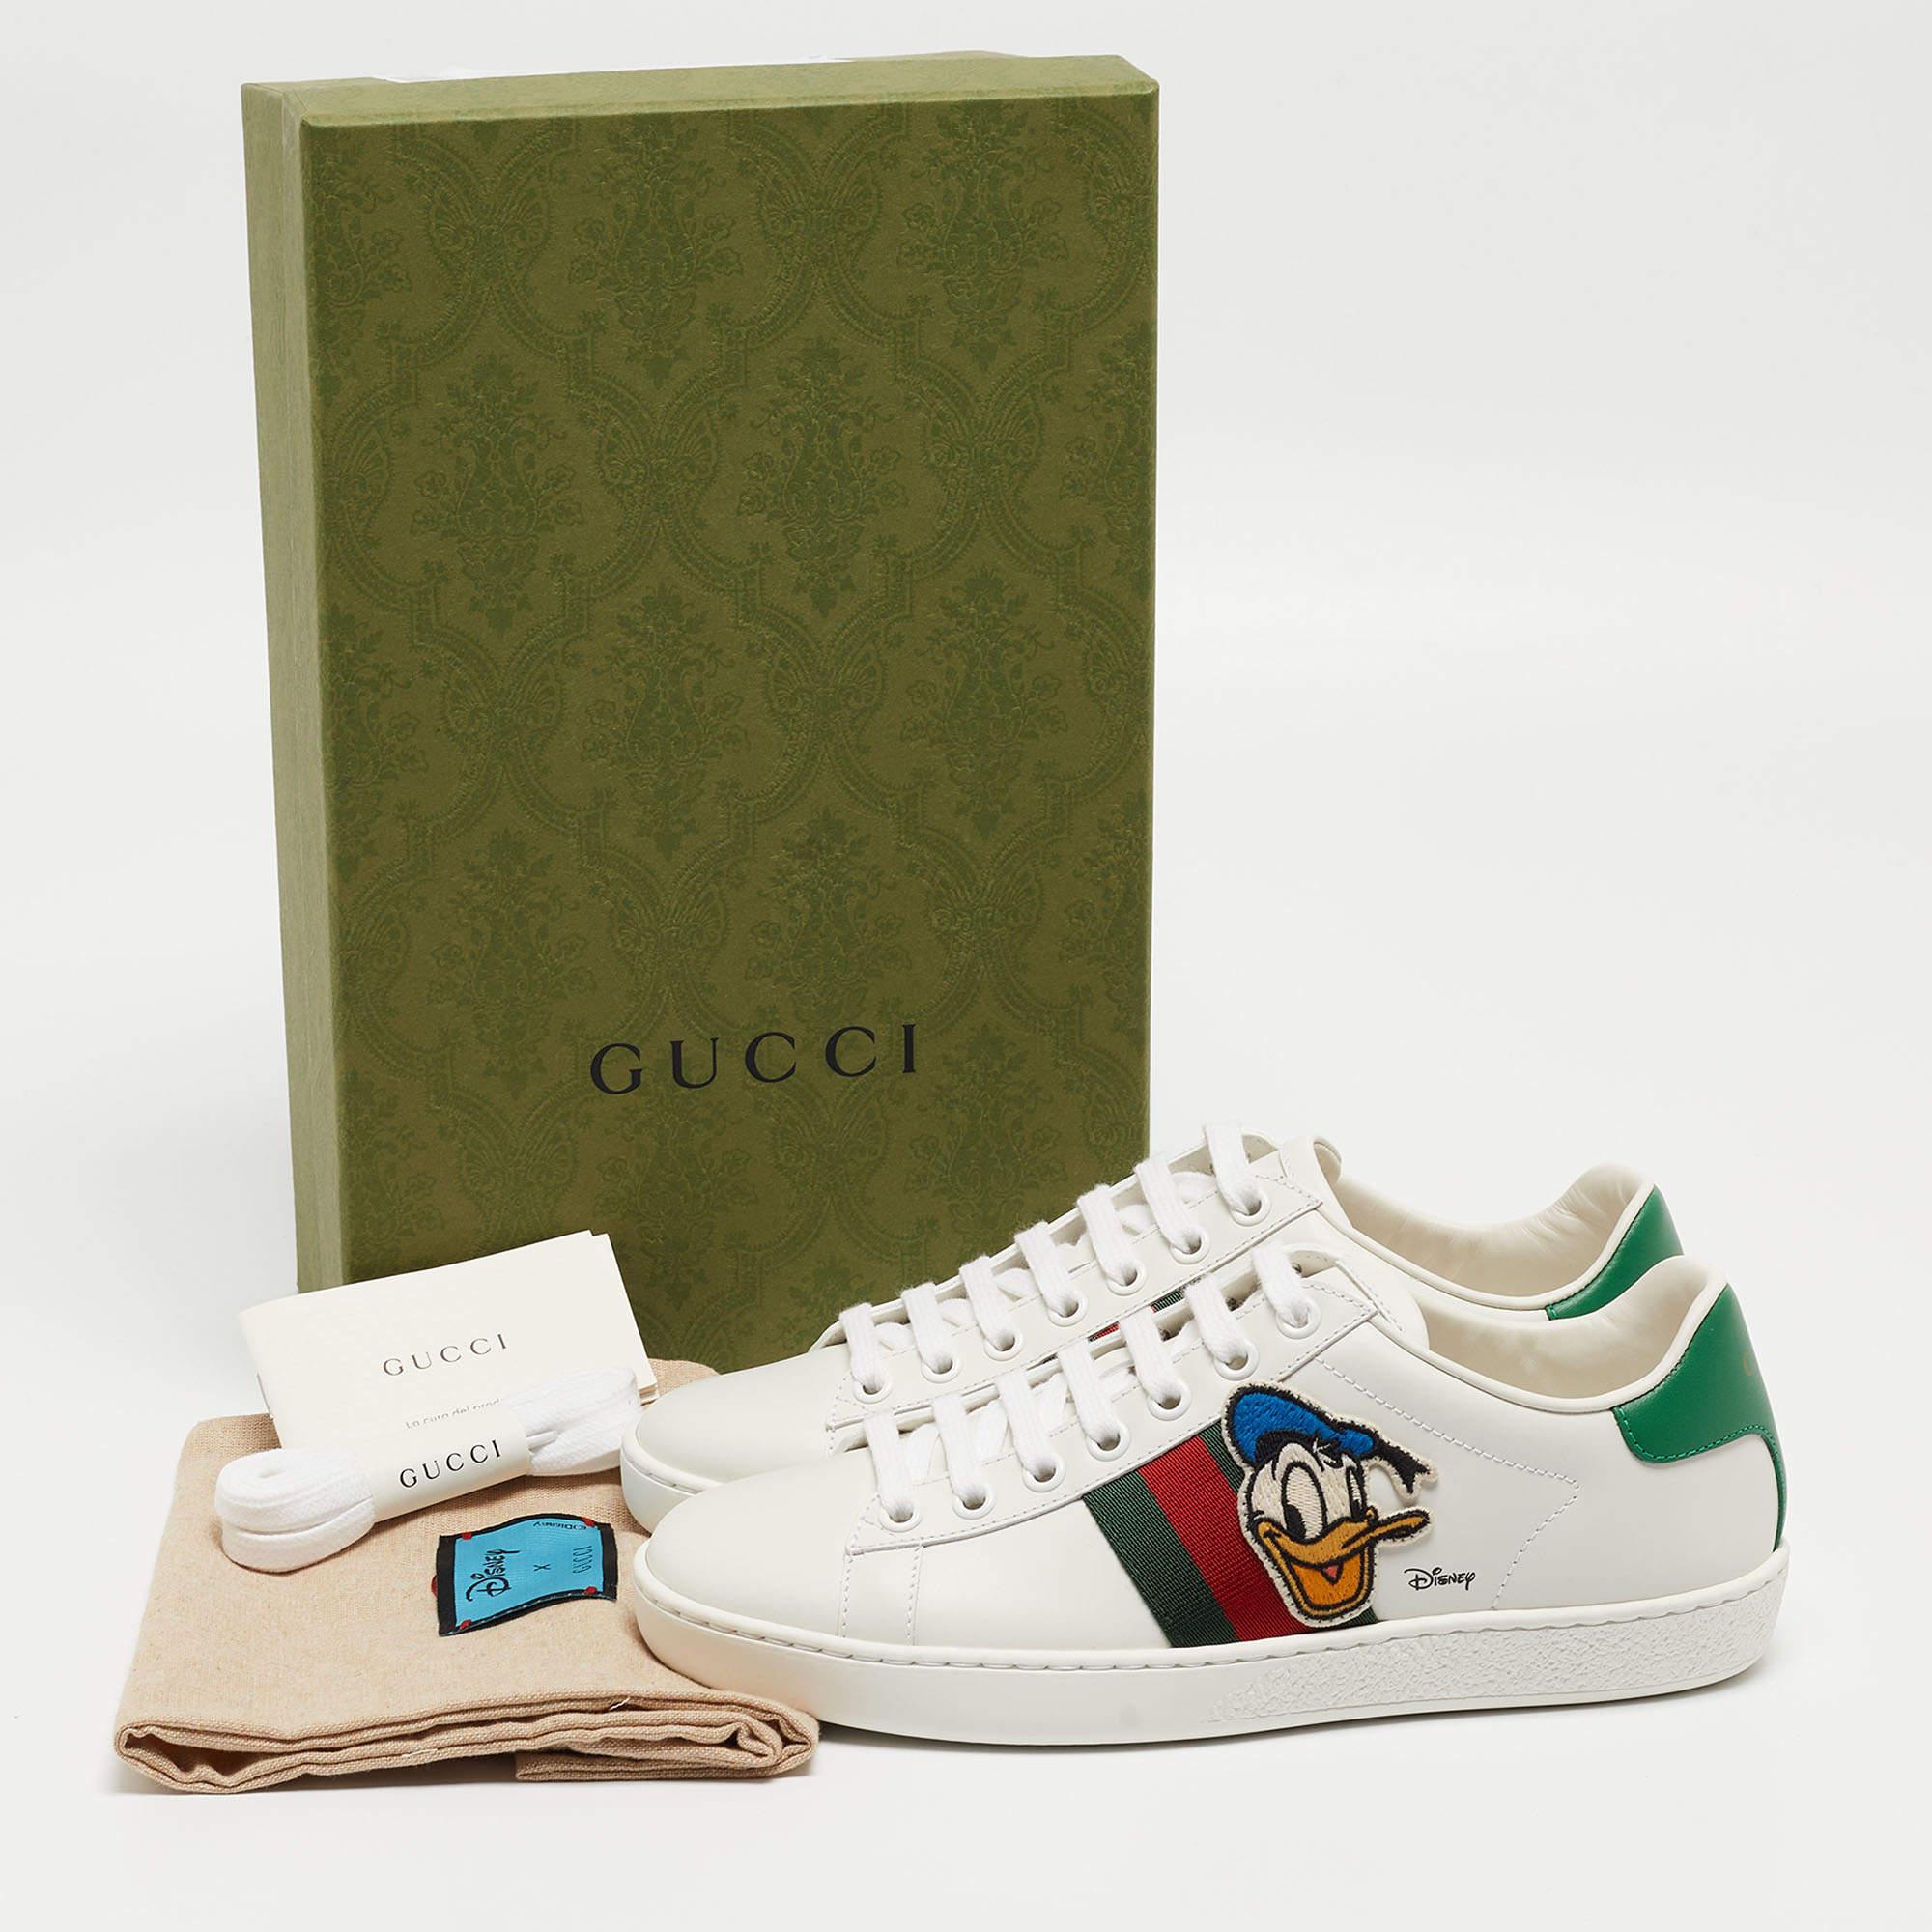 Gucci x Disney White Leather Donald Duck Ace Sneakers Size 34.5 For Sale 5